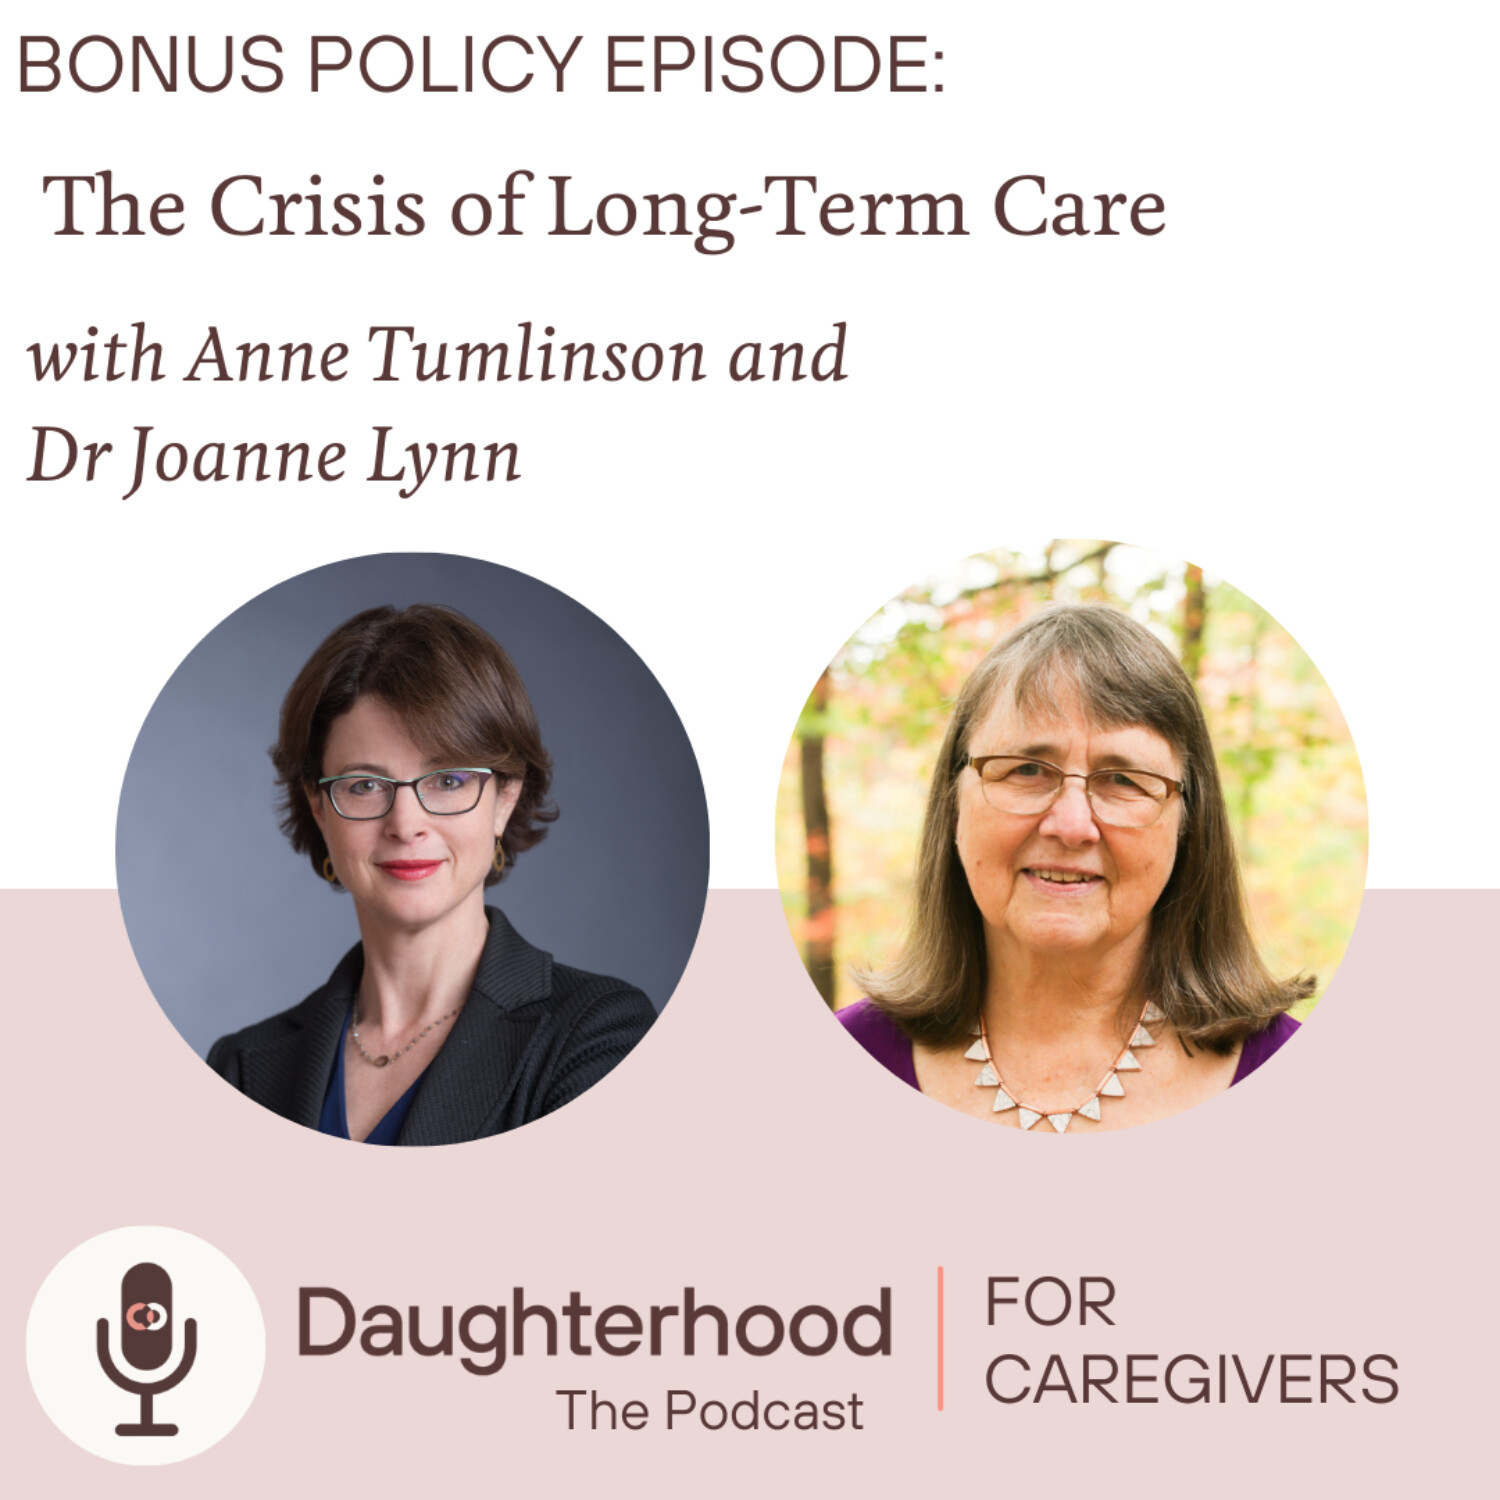 BONUS: The Crisis of Long-Term Care with Anne Tumlinson and Dr Joanne Lynn